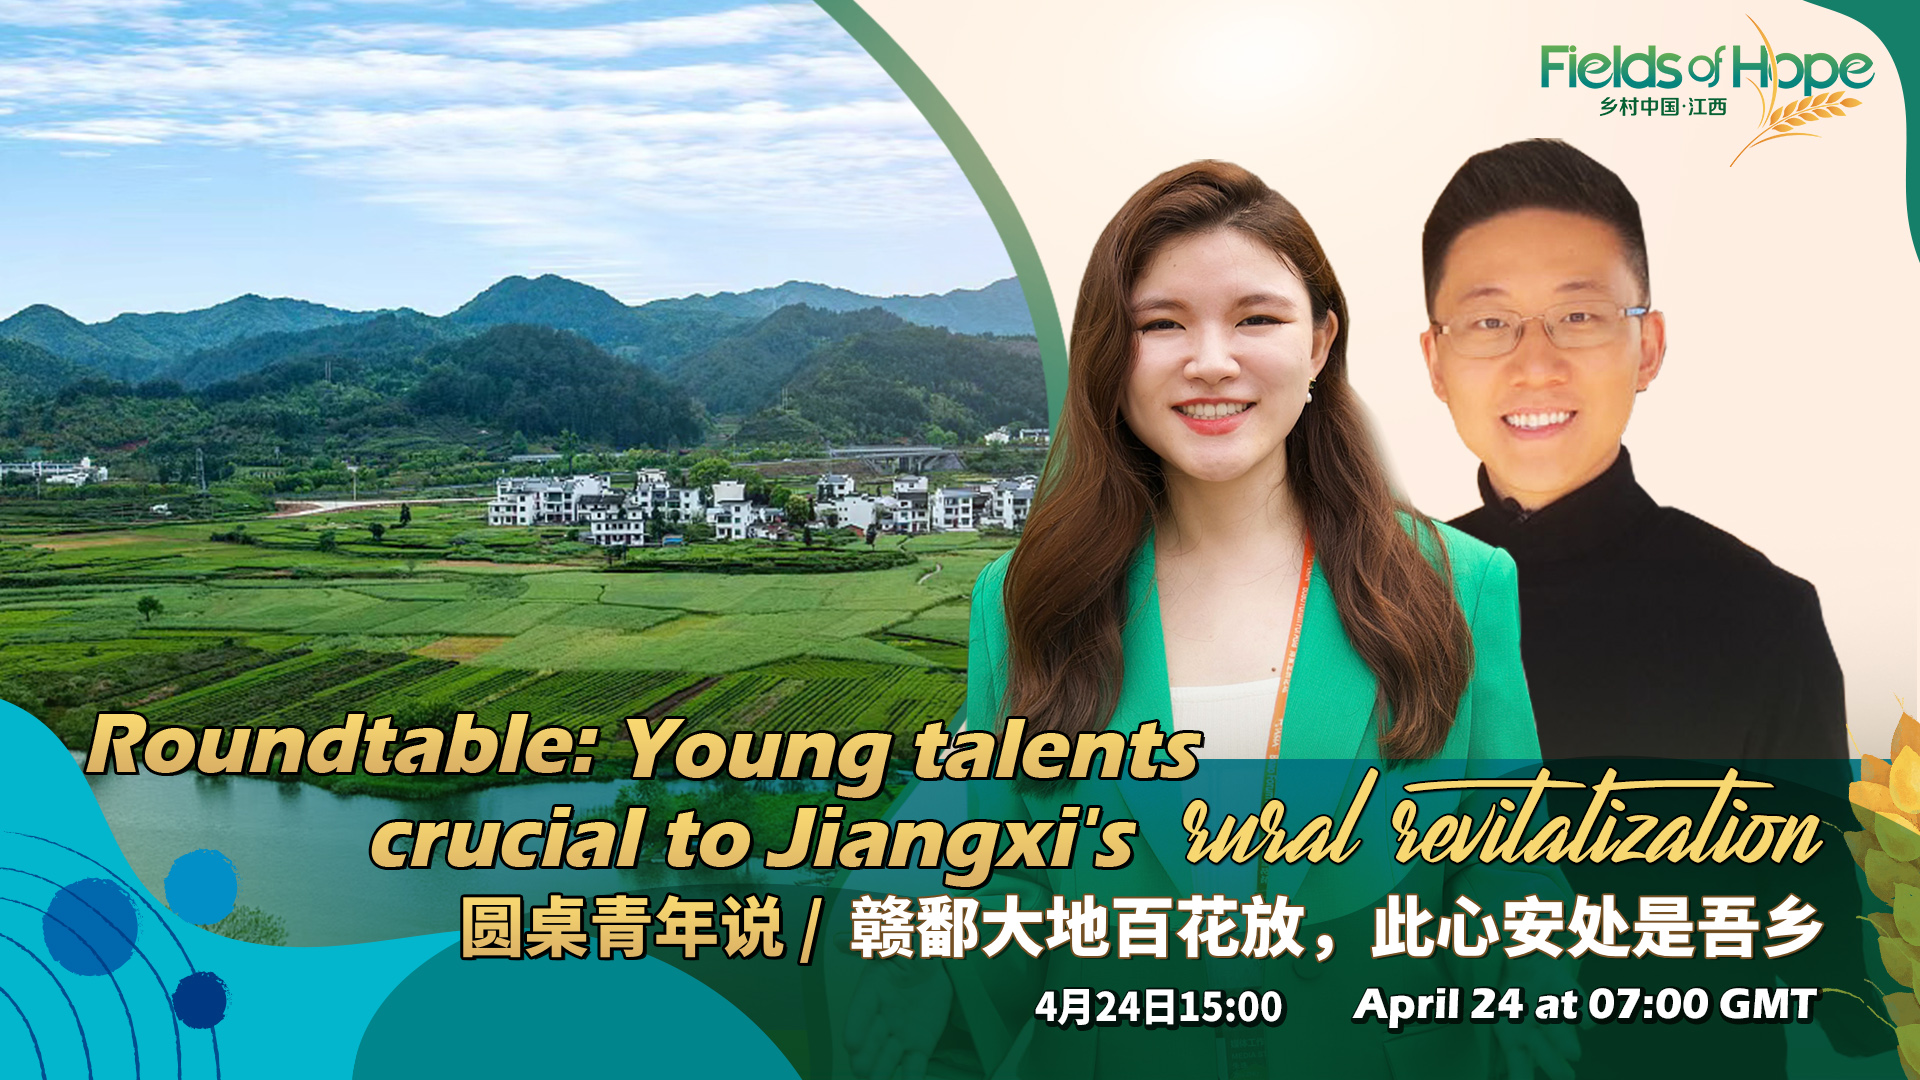 Live: Roundtable – Young talents crucial to Jiangxi's rural revitalization